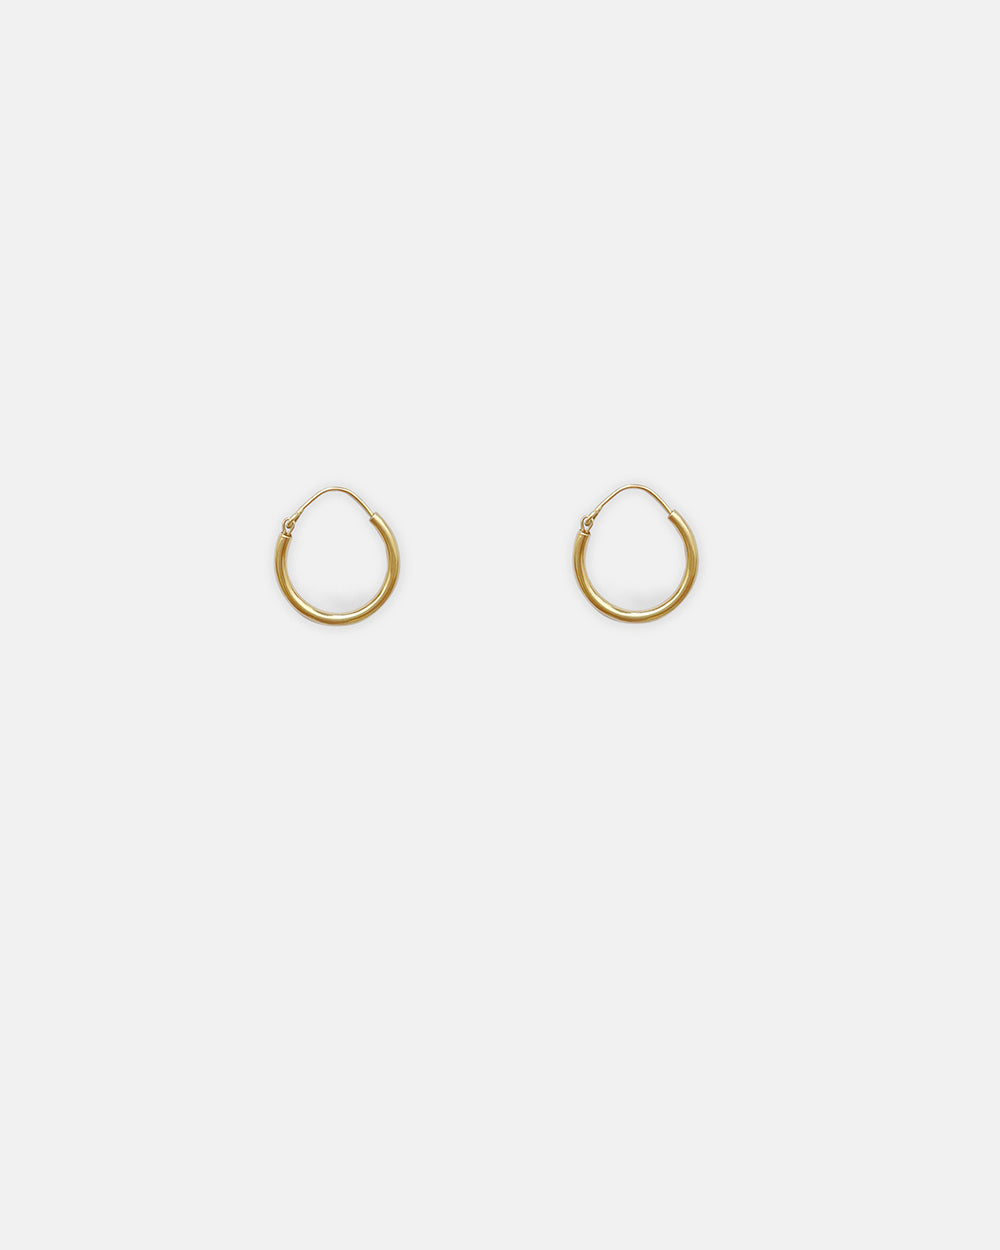 SMALL HOOPS IN GOLD